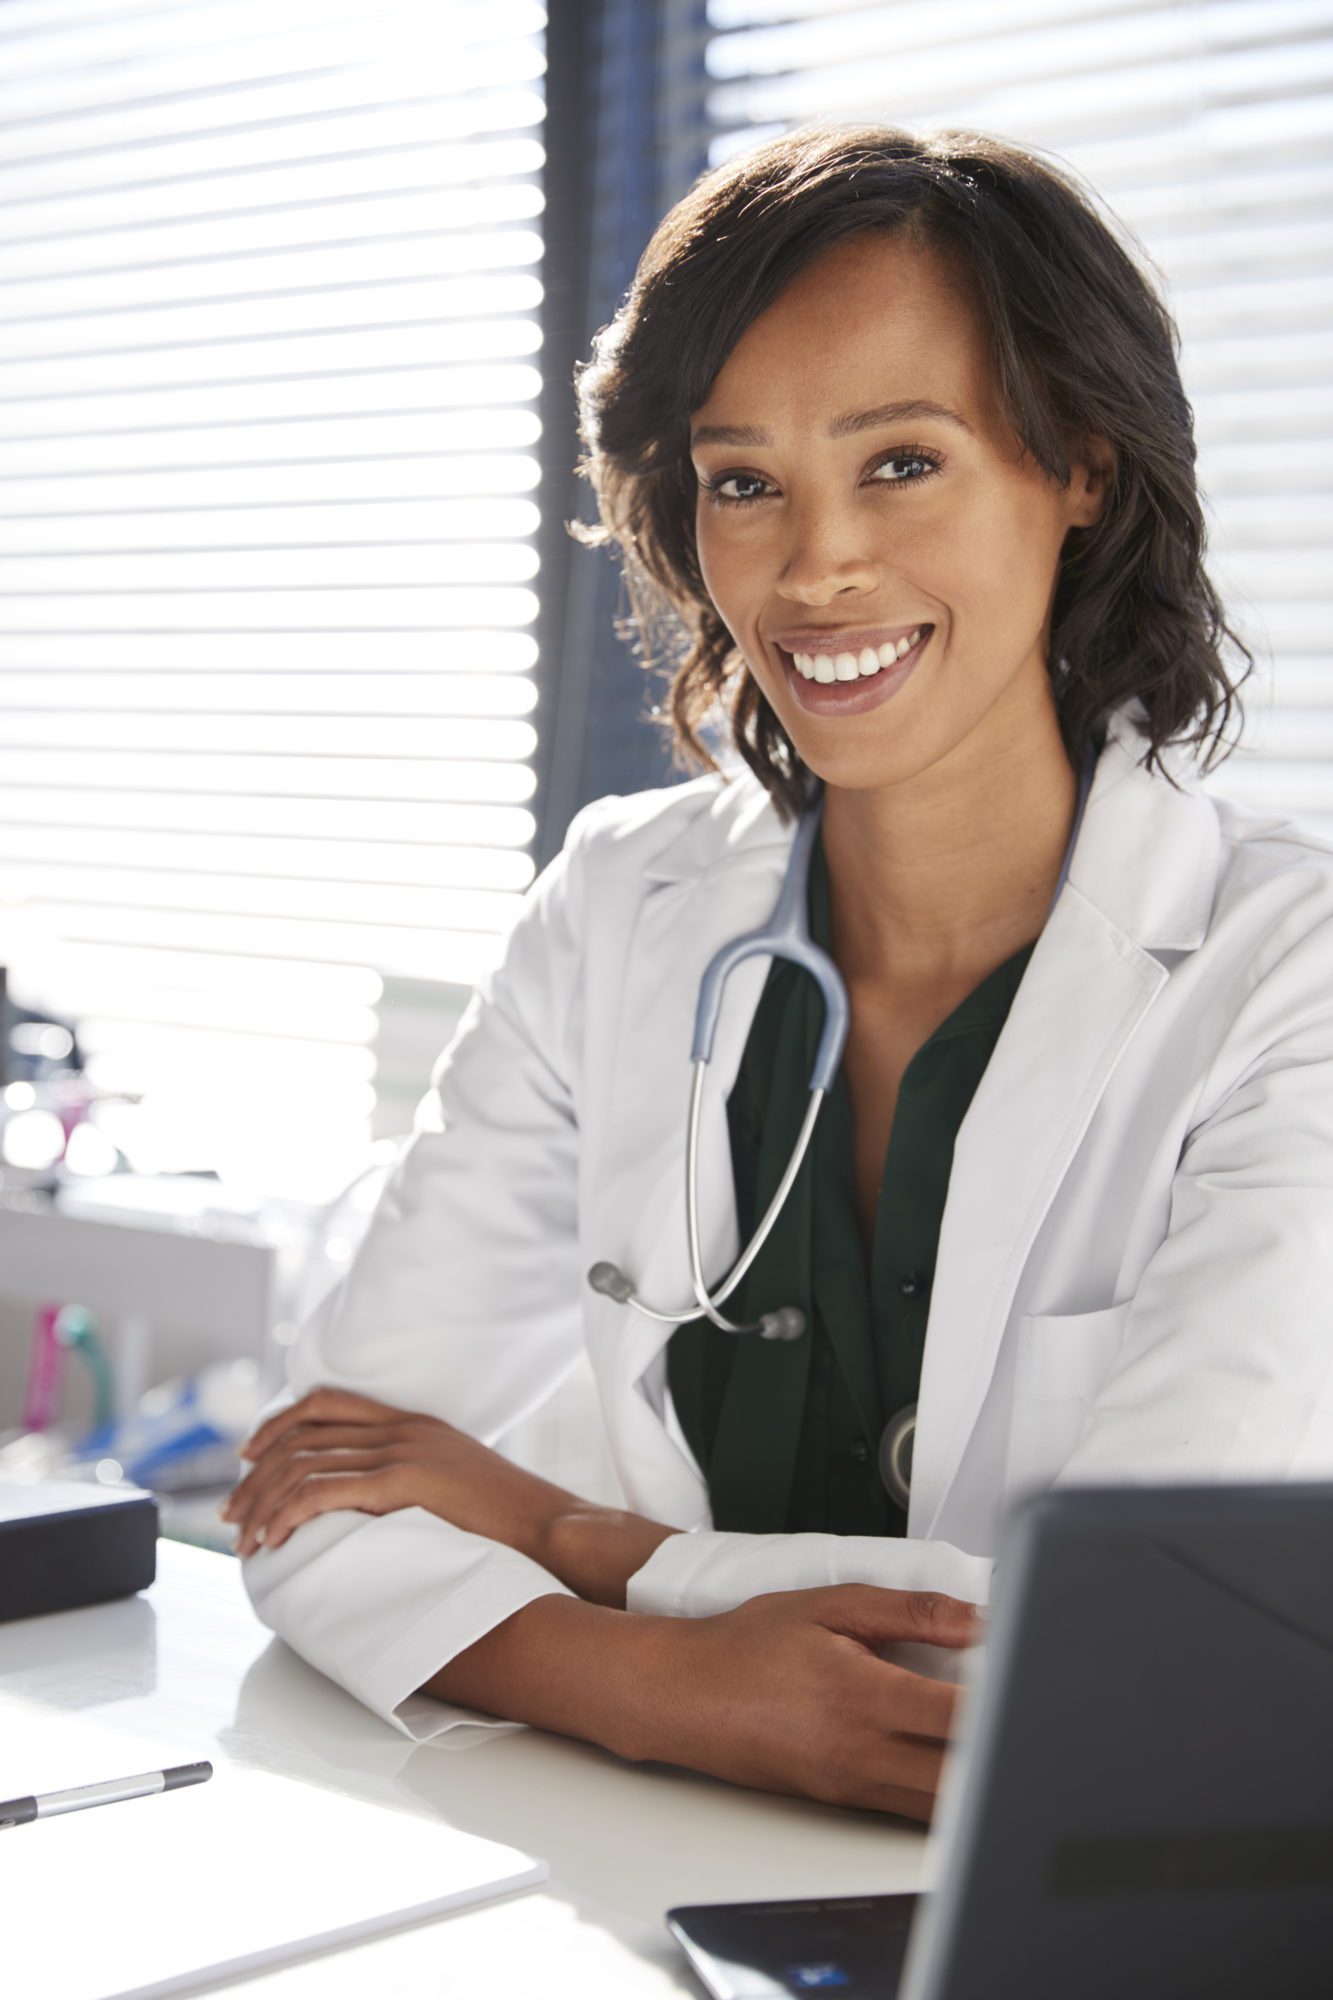 adobe stock image of Portrait Of Smiling Female Doctor Wearing White Coat With Stethoscope Sitting Behind Desk In Office